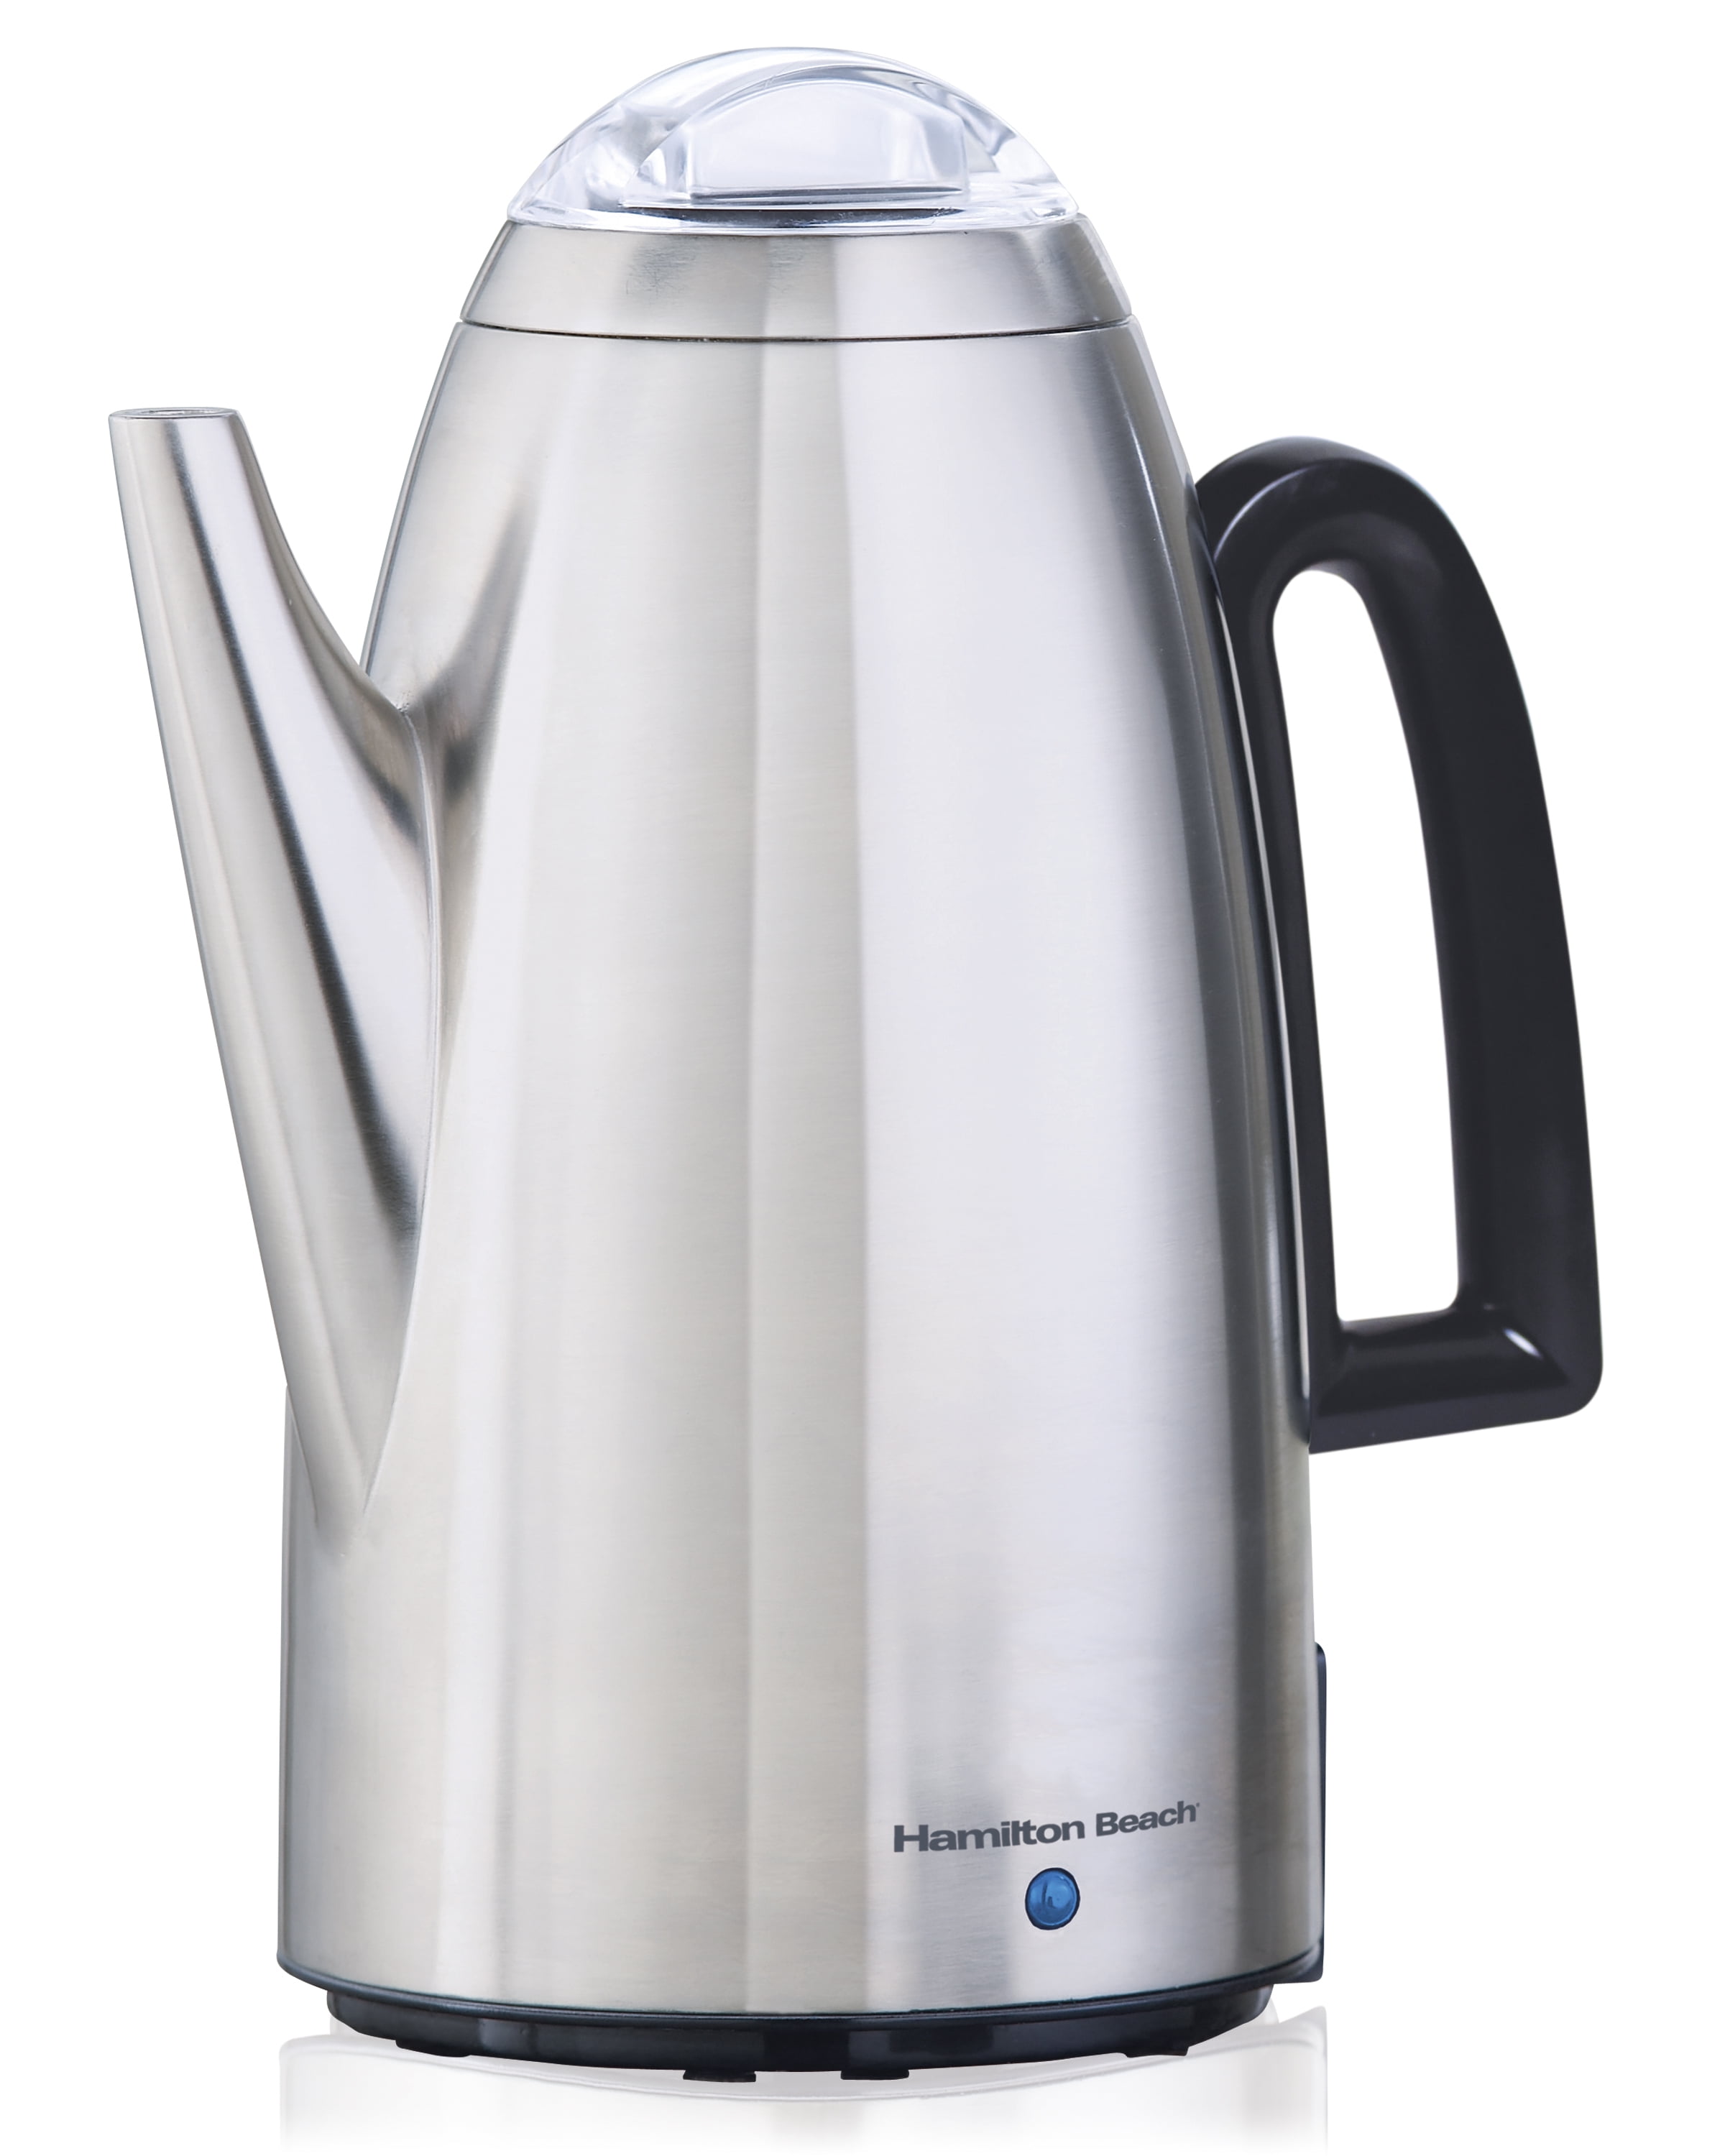 HOMOKUS Electric Coffee Percolator 12 CUPS Percolator Coffee Pot, 800W  Percolator Coffee Maker Stainless Steel with Clear Knob Cool-touch Handle